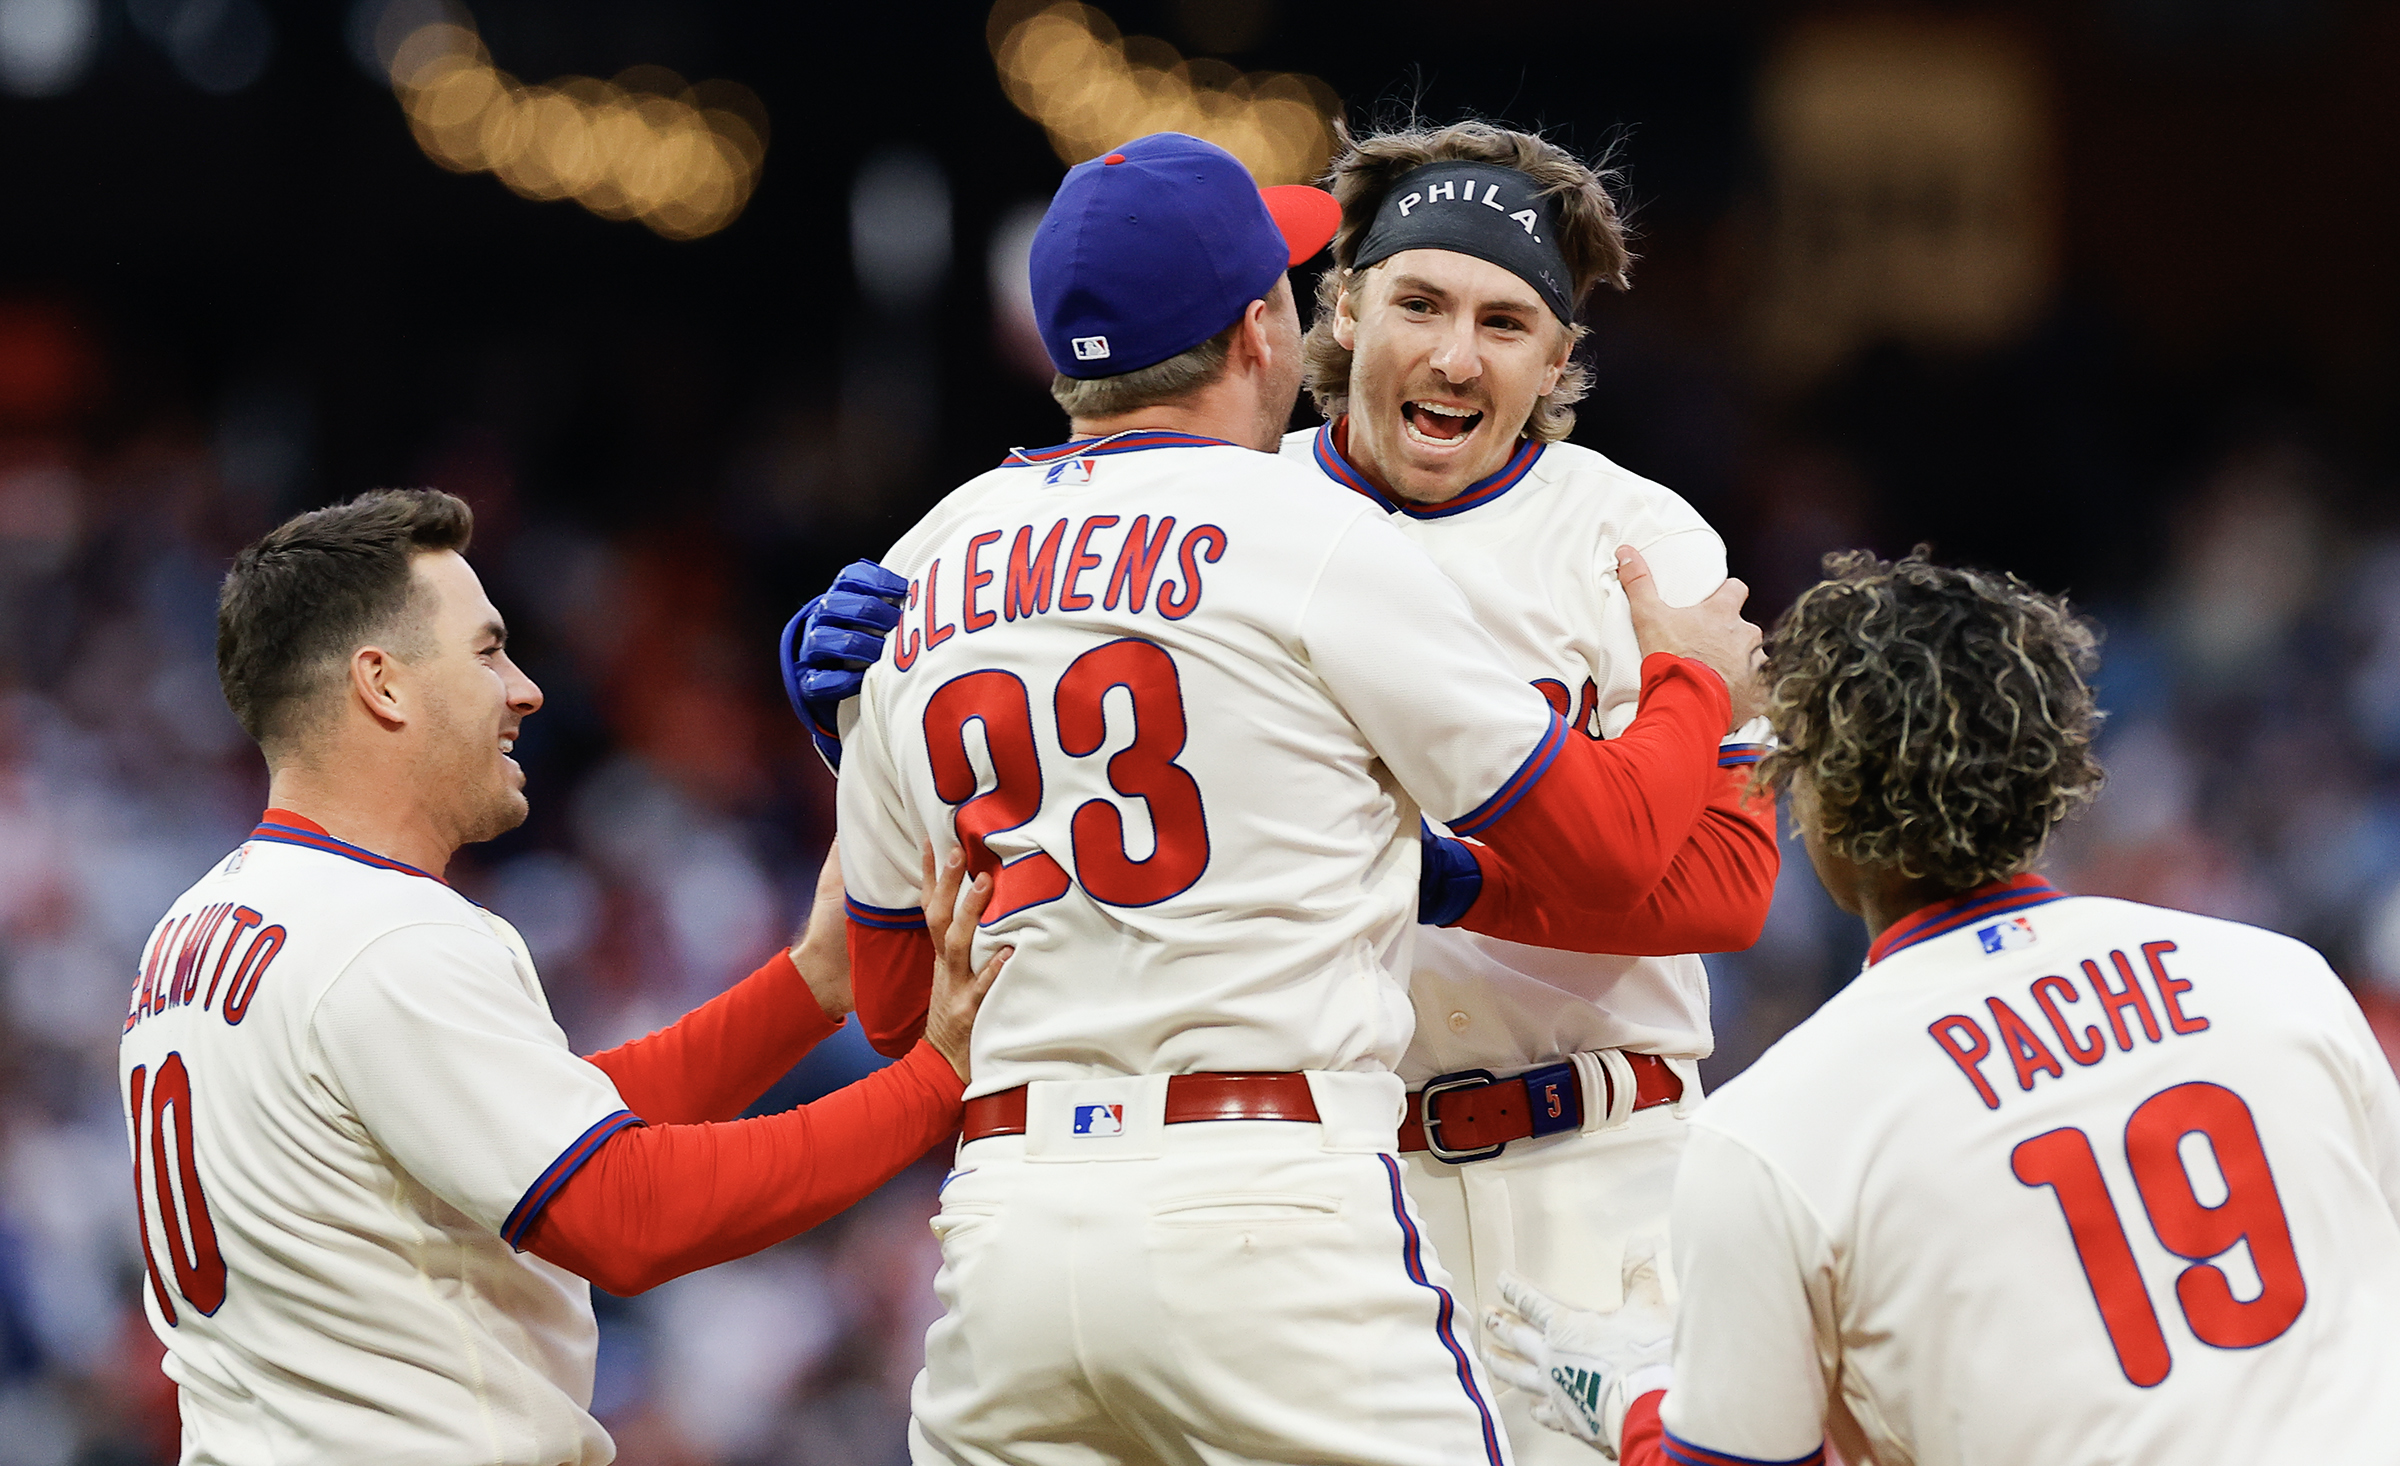 The Philadelphia Phillies' Bryson Stott gets a ceremonial water bath from  teammates Kyle Schwarber and Nick Castellanos after Stott's walk-off single  to defeat the Cincinnati Reds, 3-2, at Citizens Bank Park on